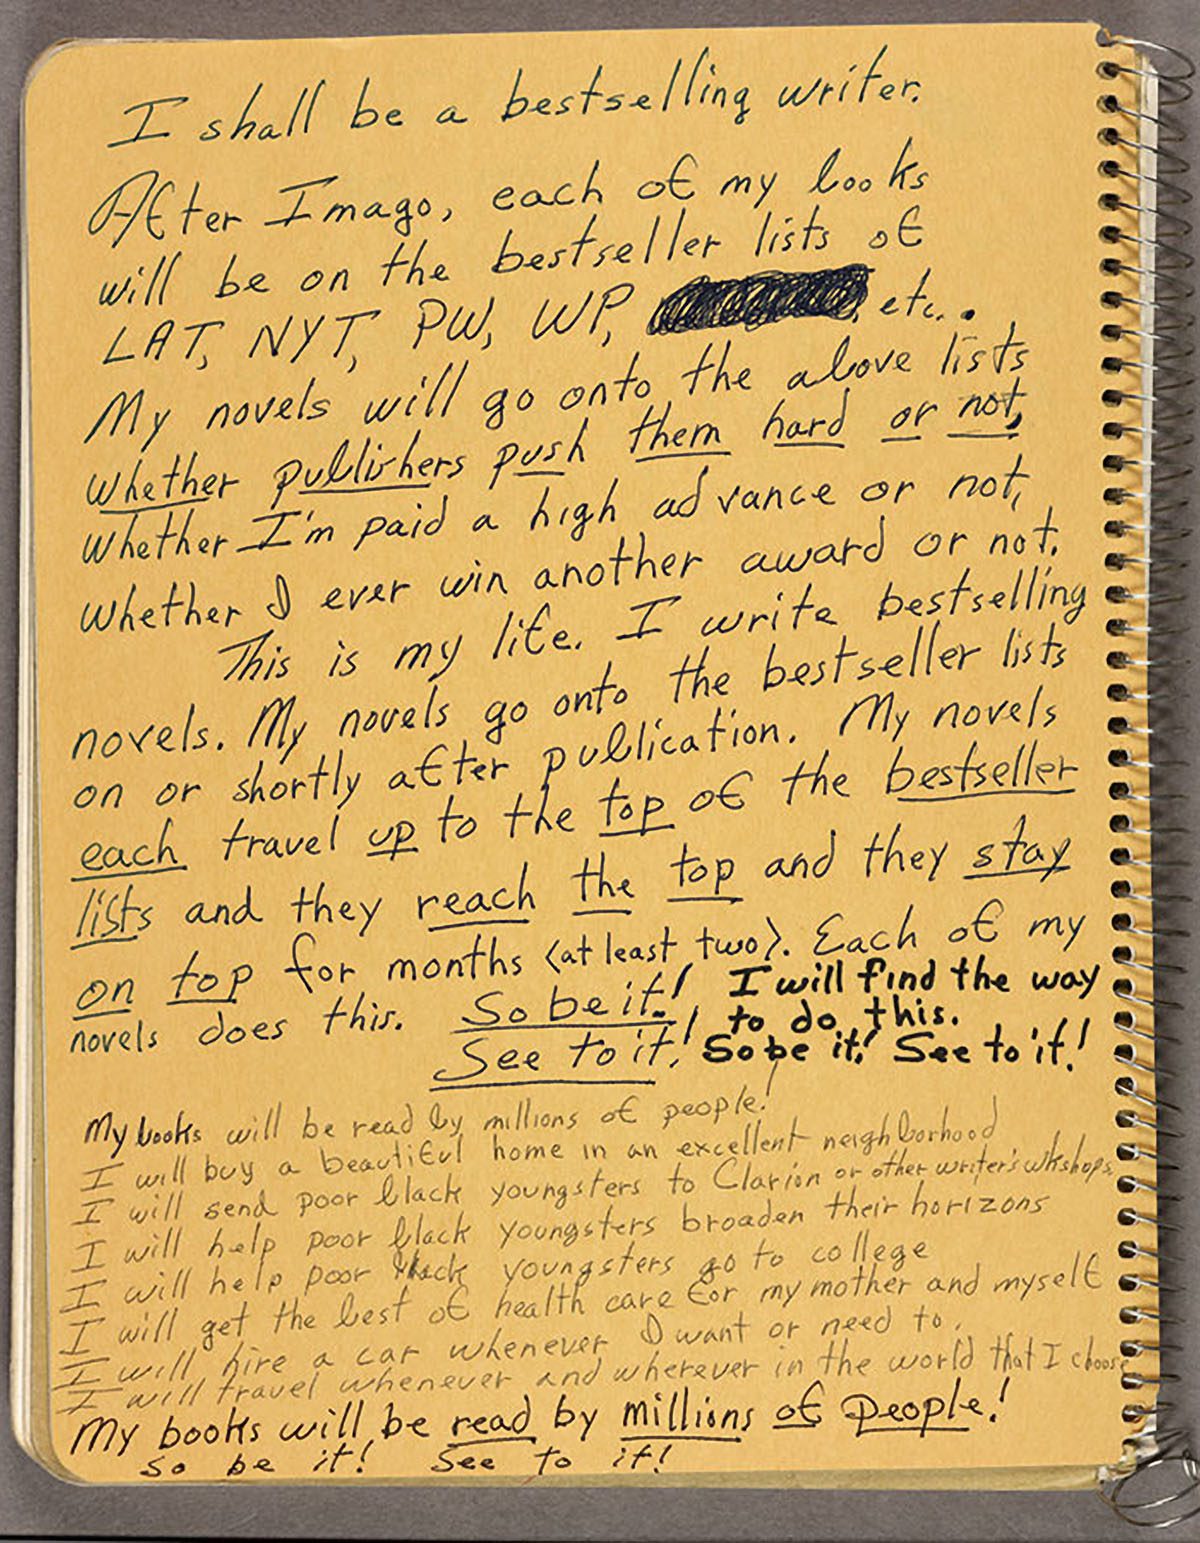 A page of handwritten affirmations that Butler wrote for herself as an adult in which she includes her hope of becoming a bestselling author.